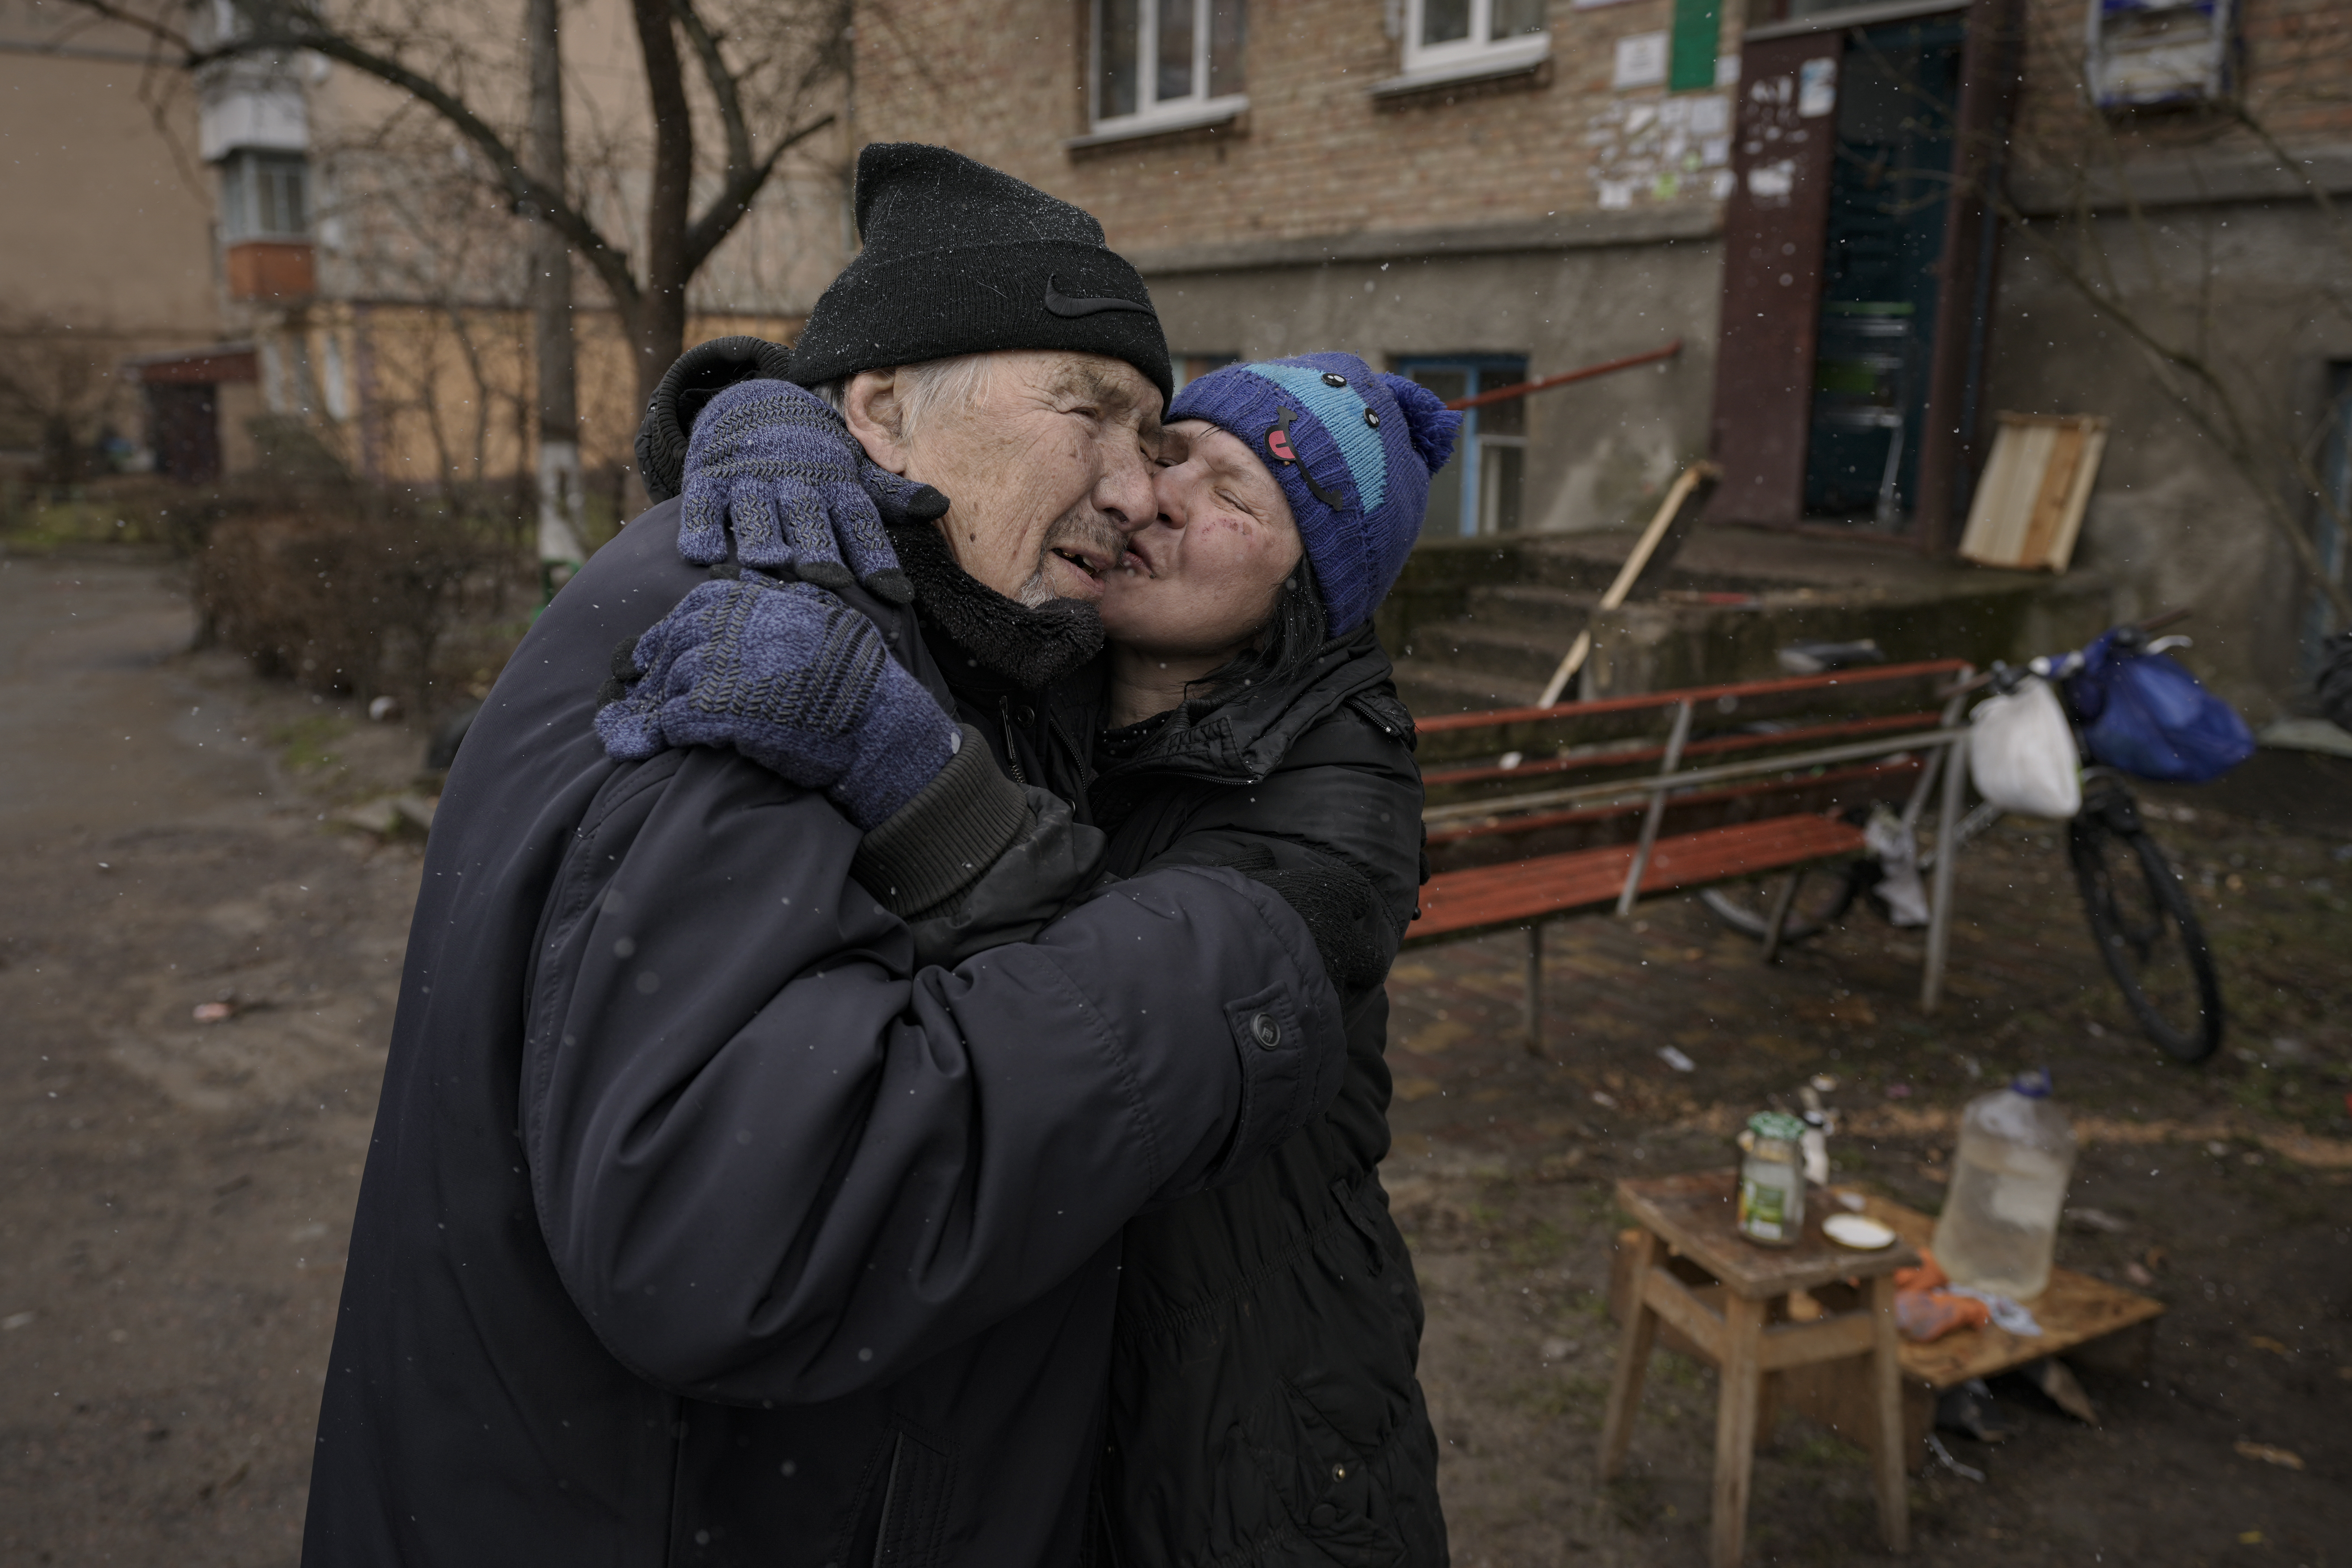 On Sunday, April 3, 2022, Pucha, a woman kisses a man while cooking over a fire outside an apartment building that has been without electricity, water and gas since the start of the Russian invasion of Ukraine.  (AP Photo / Vadim Girta)